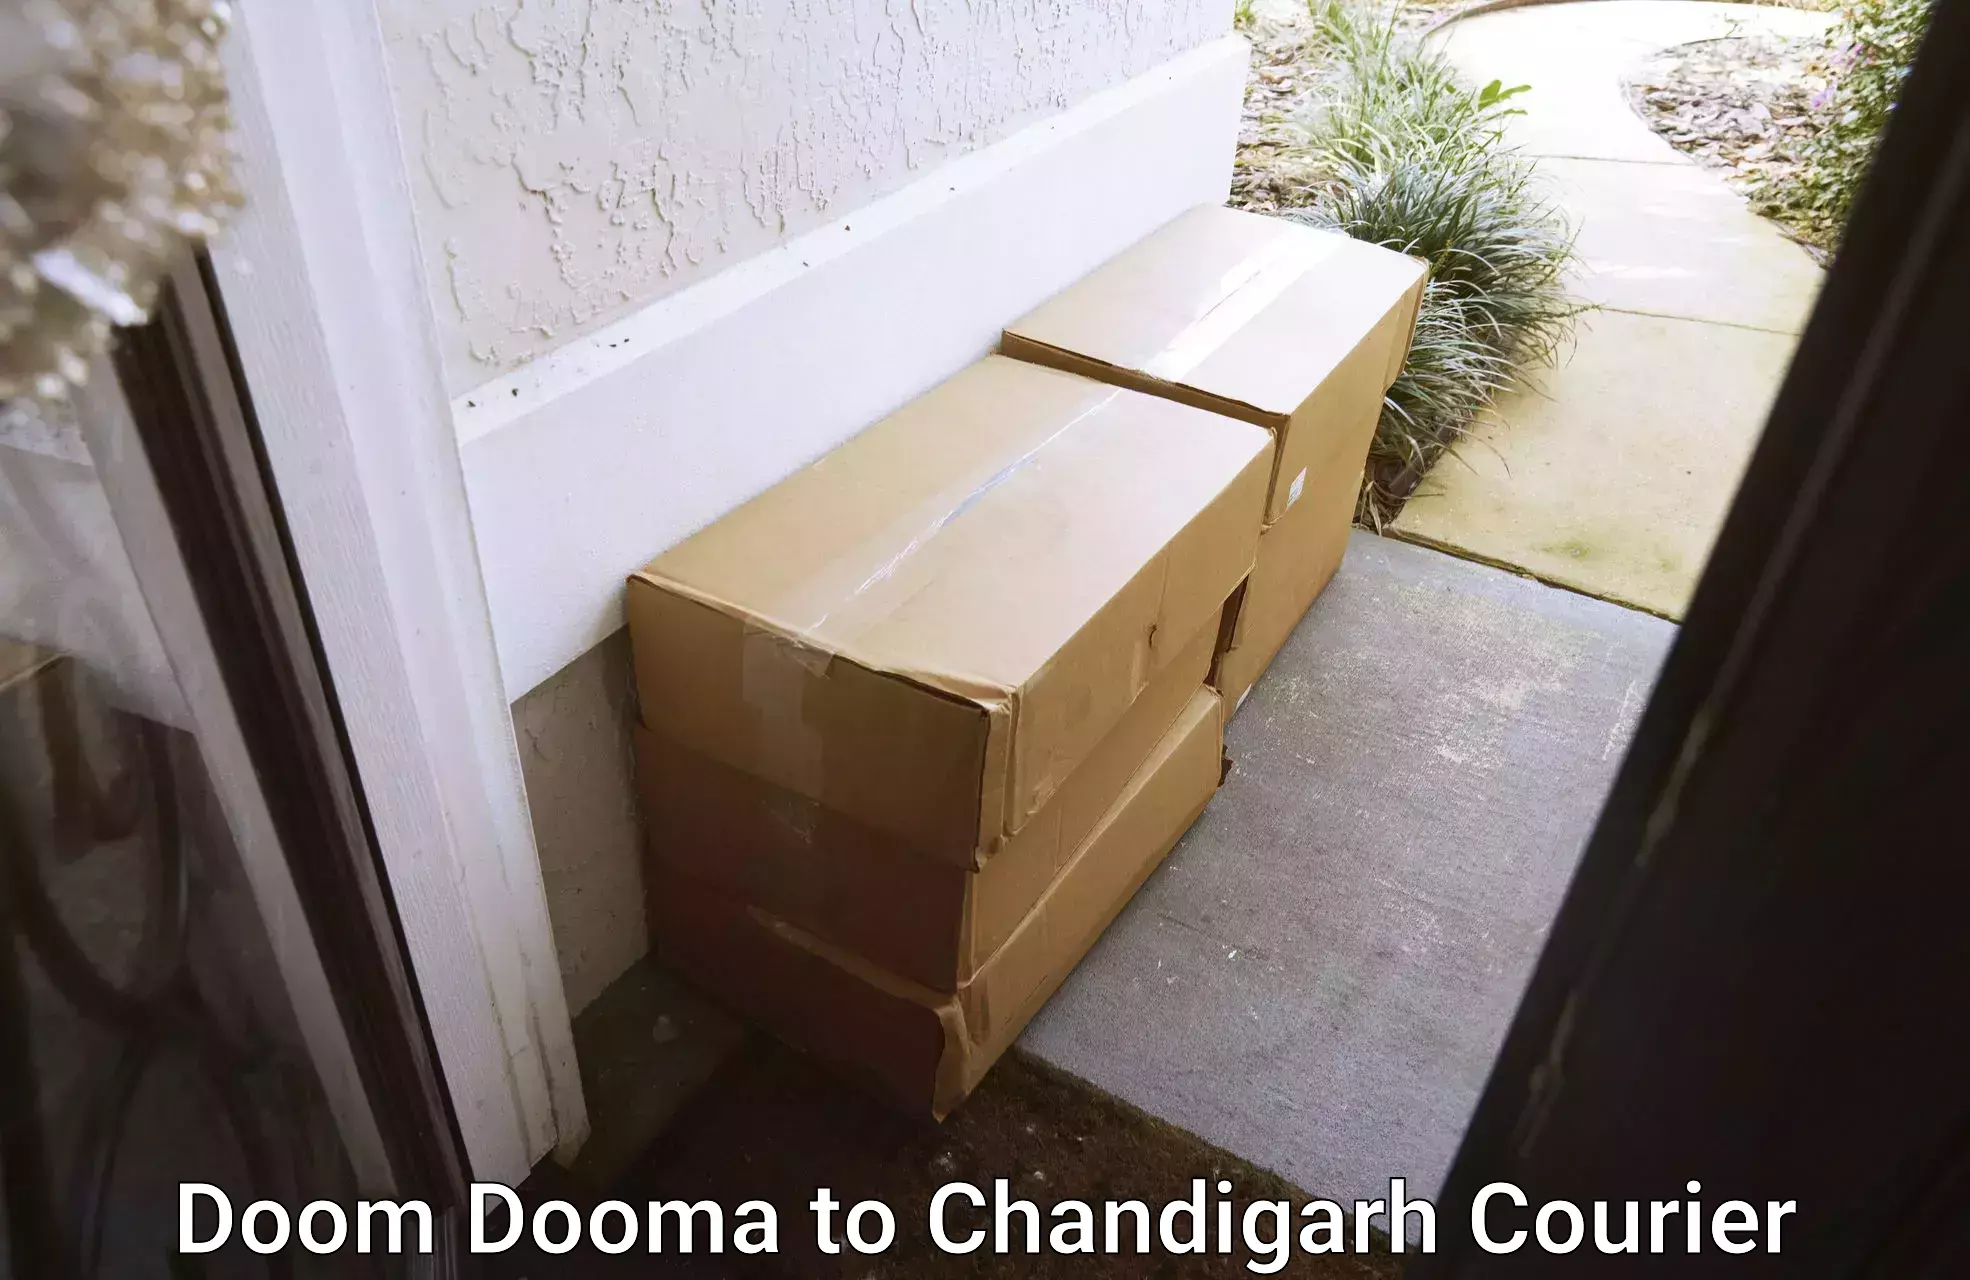 Advanced tracking systems Doom Dooma to Chandigarh